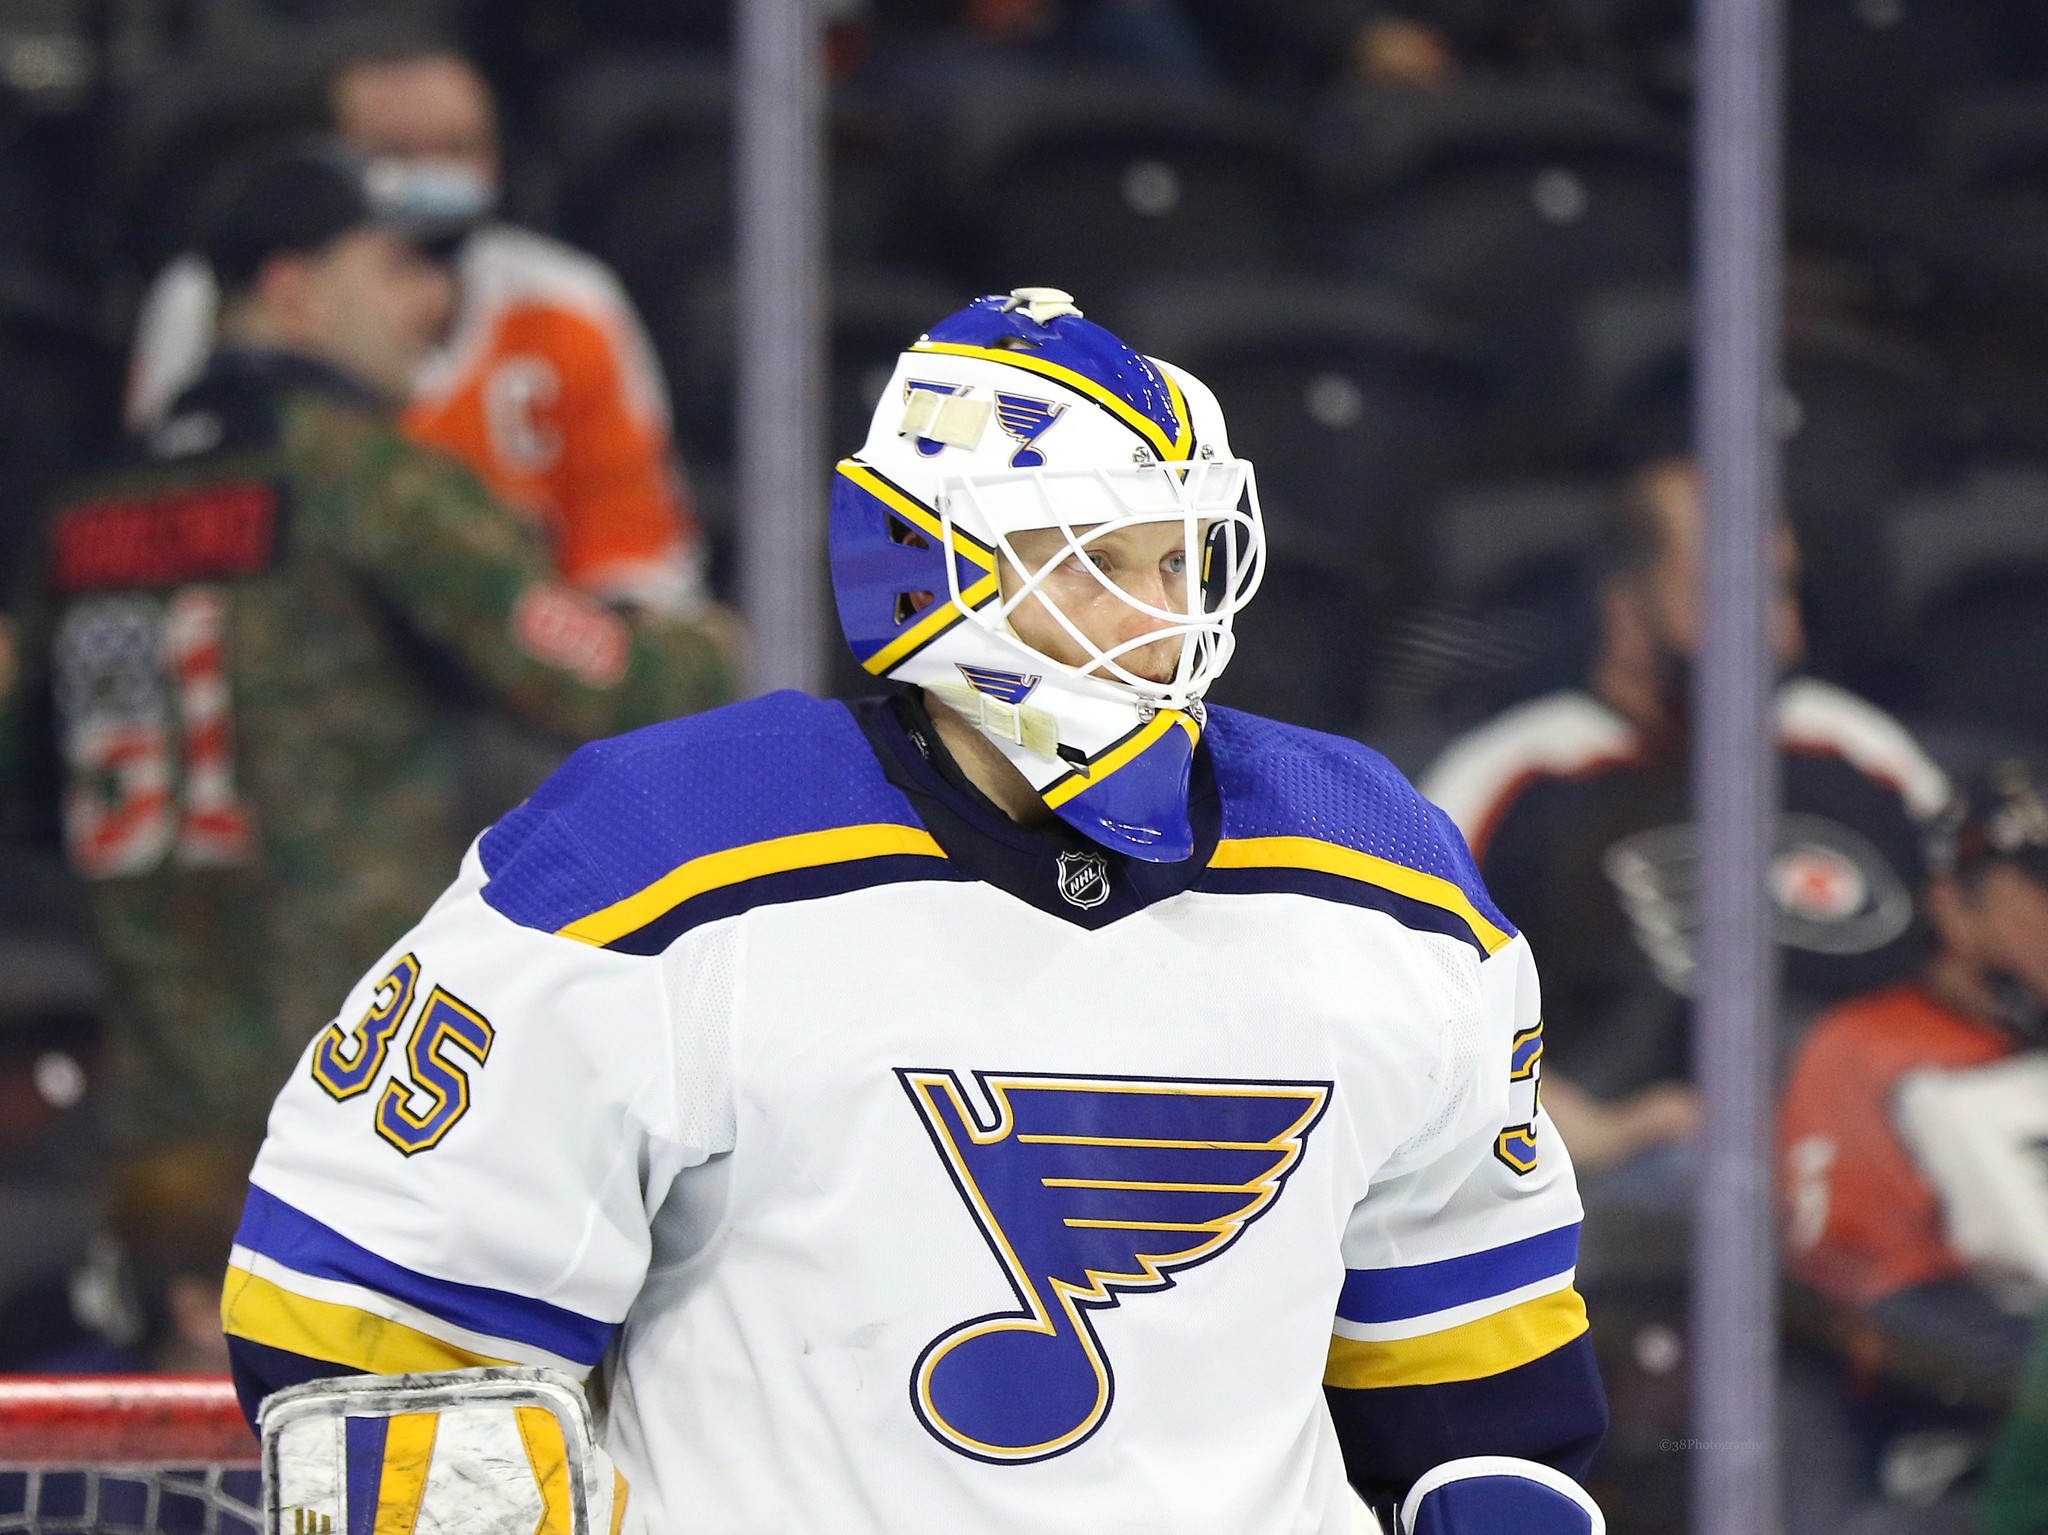 Ville Husso - NHL Goalie - News, Stats, Bio and more - The Athletic